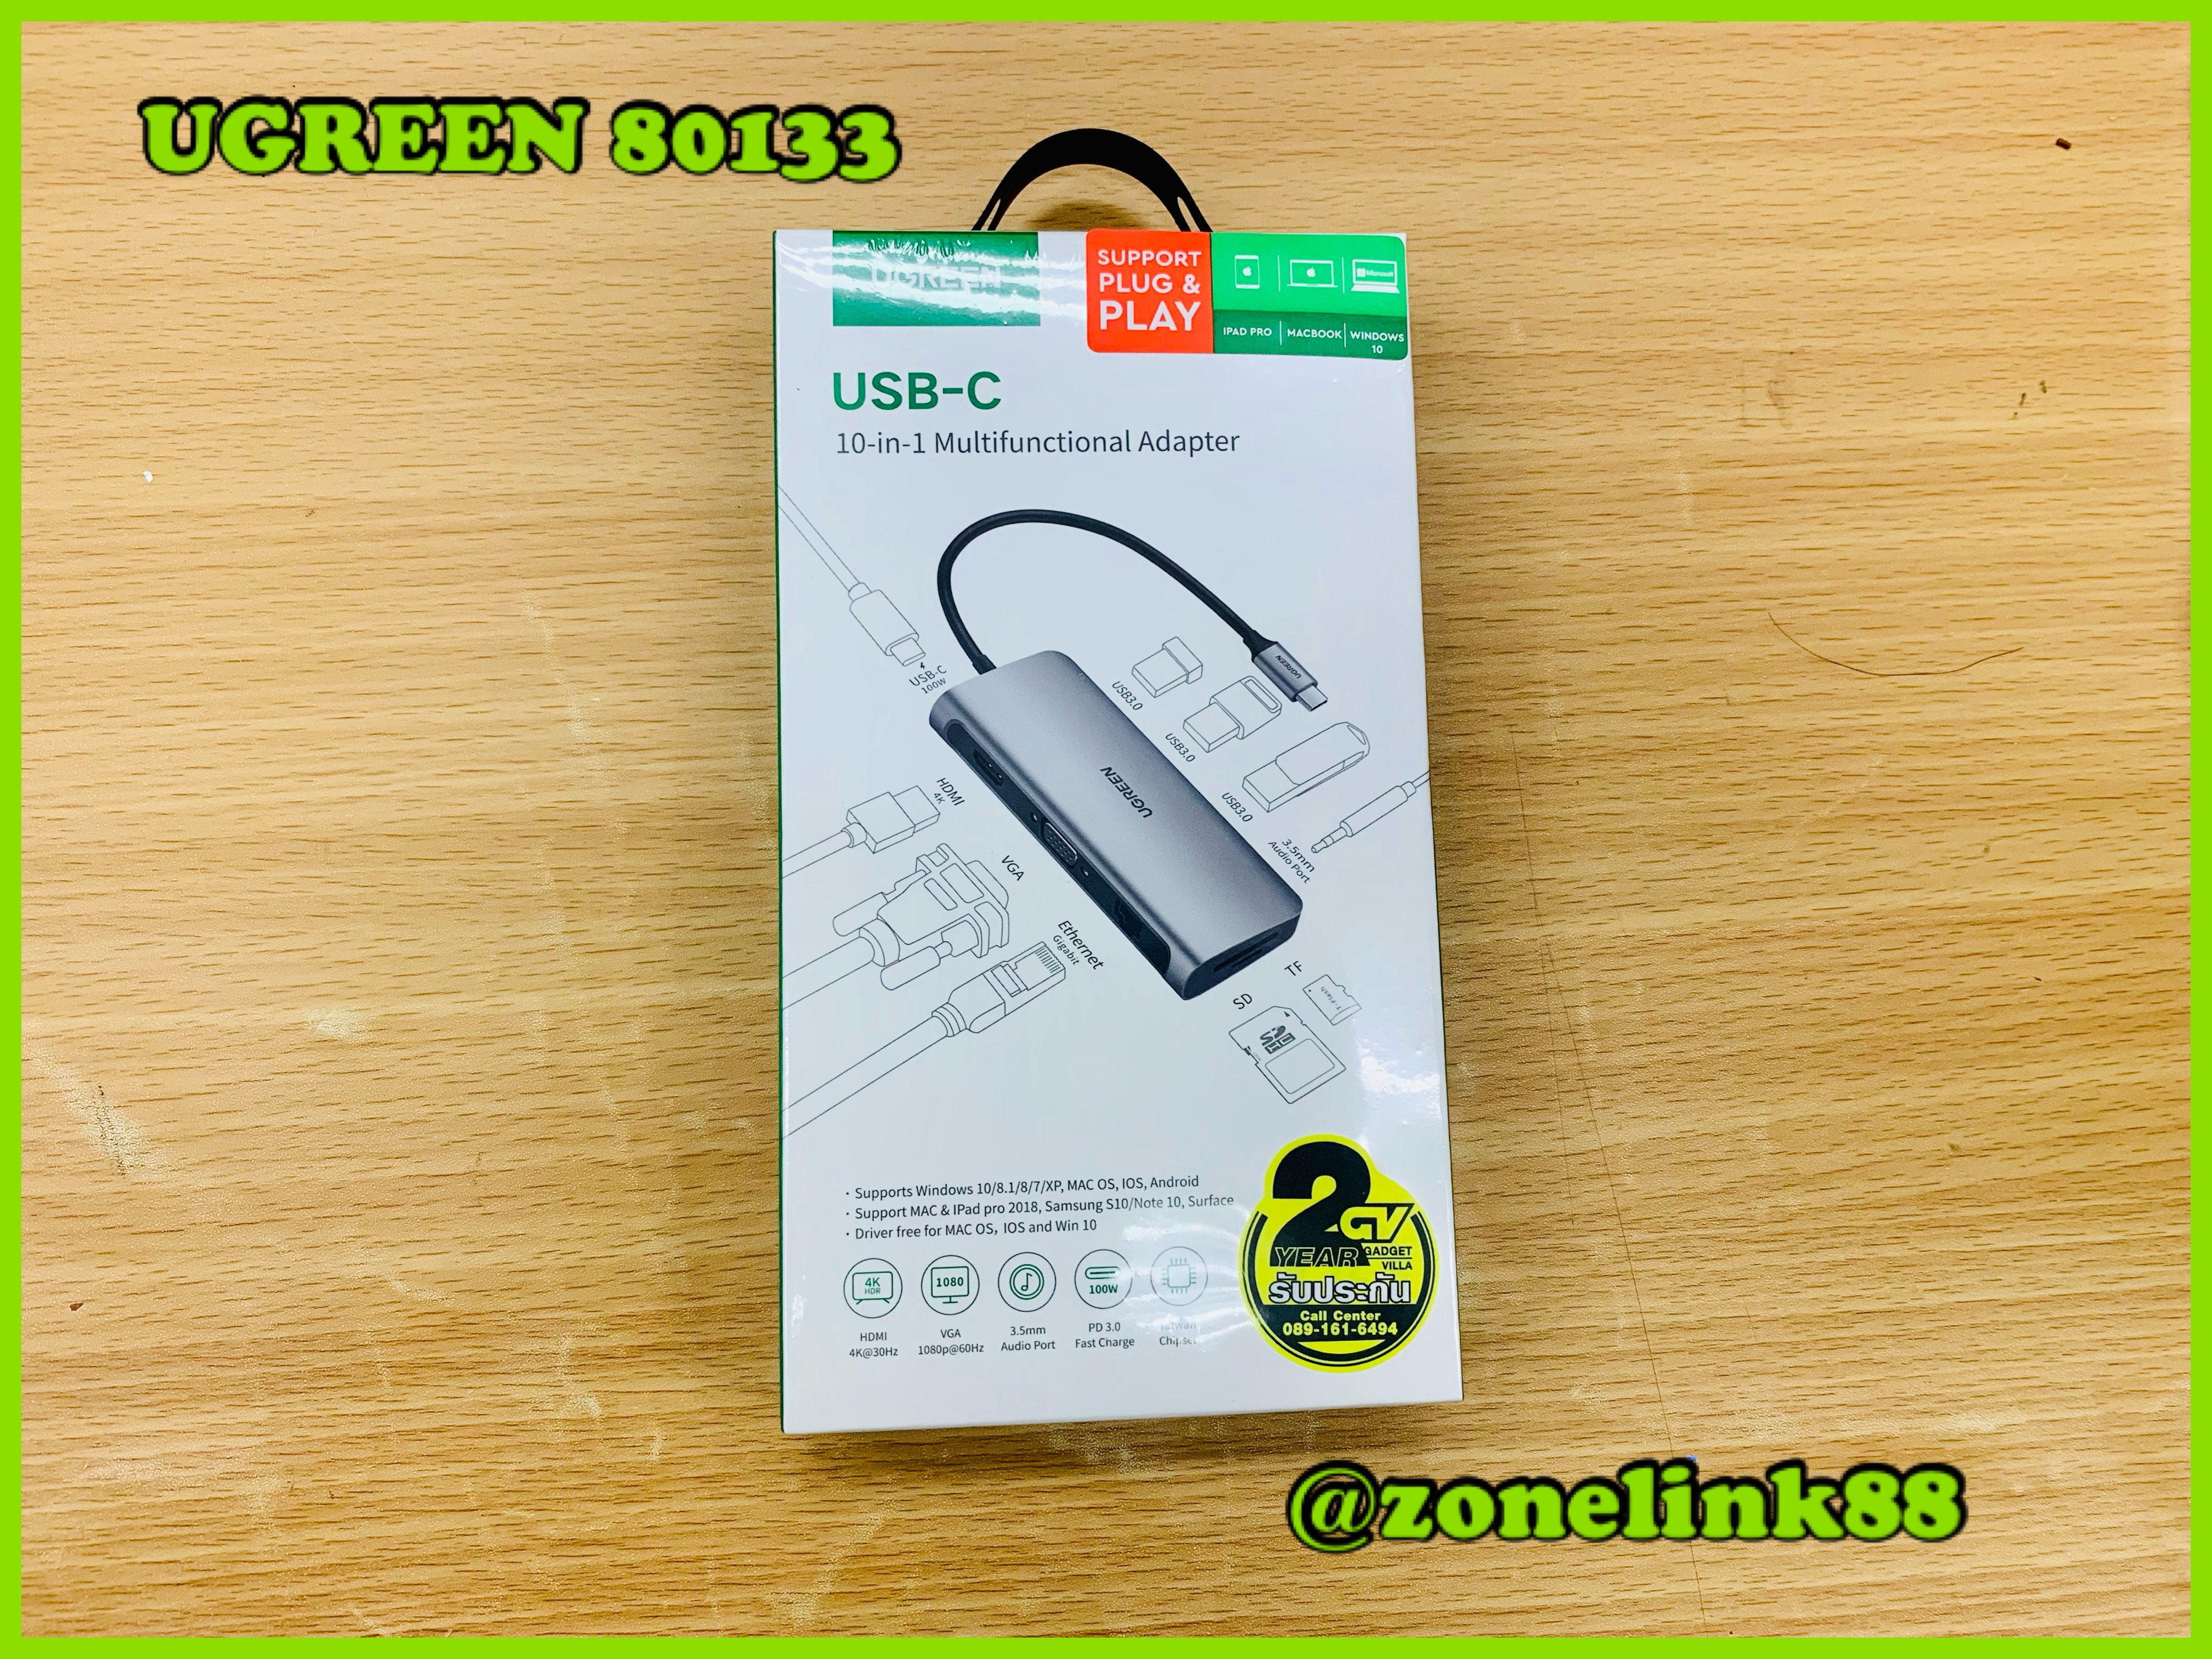 UGREEN USB C Hub 10 in 1 Type C Hub with Ethernet, 4K USB C to HDMI, VGA,  PD Power Delivery, 3 USB 3.0 Ports, USB C to 3.5mm, SD/TF Cards Reader for